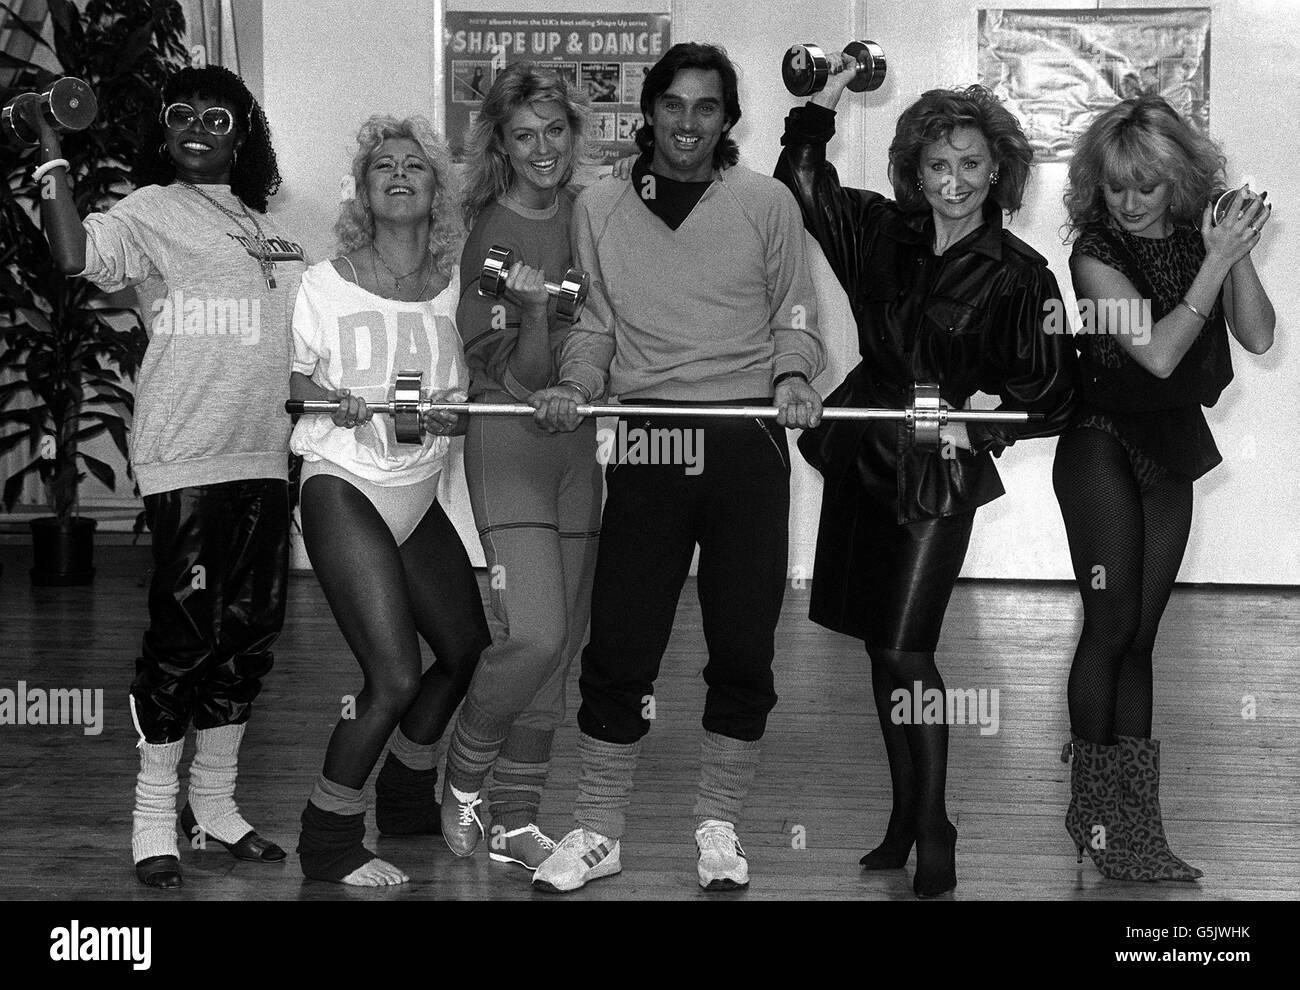 1984: Lifestyle Records enters a new phase with the launch of five new 'Shape up and Dance' LPs featuring George Best and his girlfriend former Miss World Mary Stavin (3rd from left). The other four LPs are by Patti Boulaye (left), Suzanne Dando (2nd left), Lulu (2nd right) and Bucks Fizz singer Jay Aston (right). They are pictured at The Fitness Centre, Covent Garden, London. Stock Photo